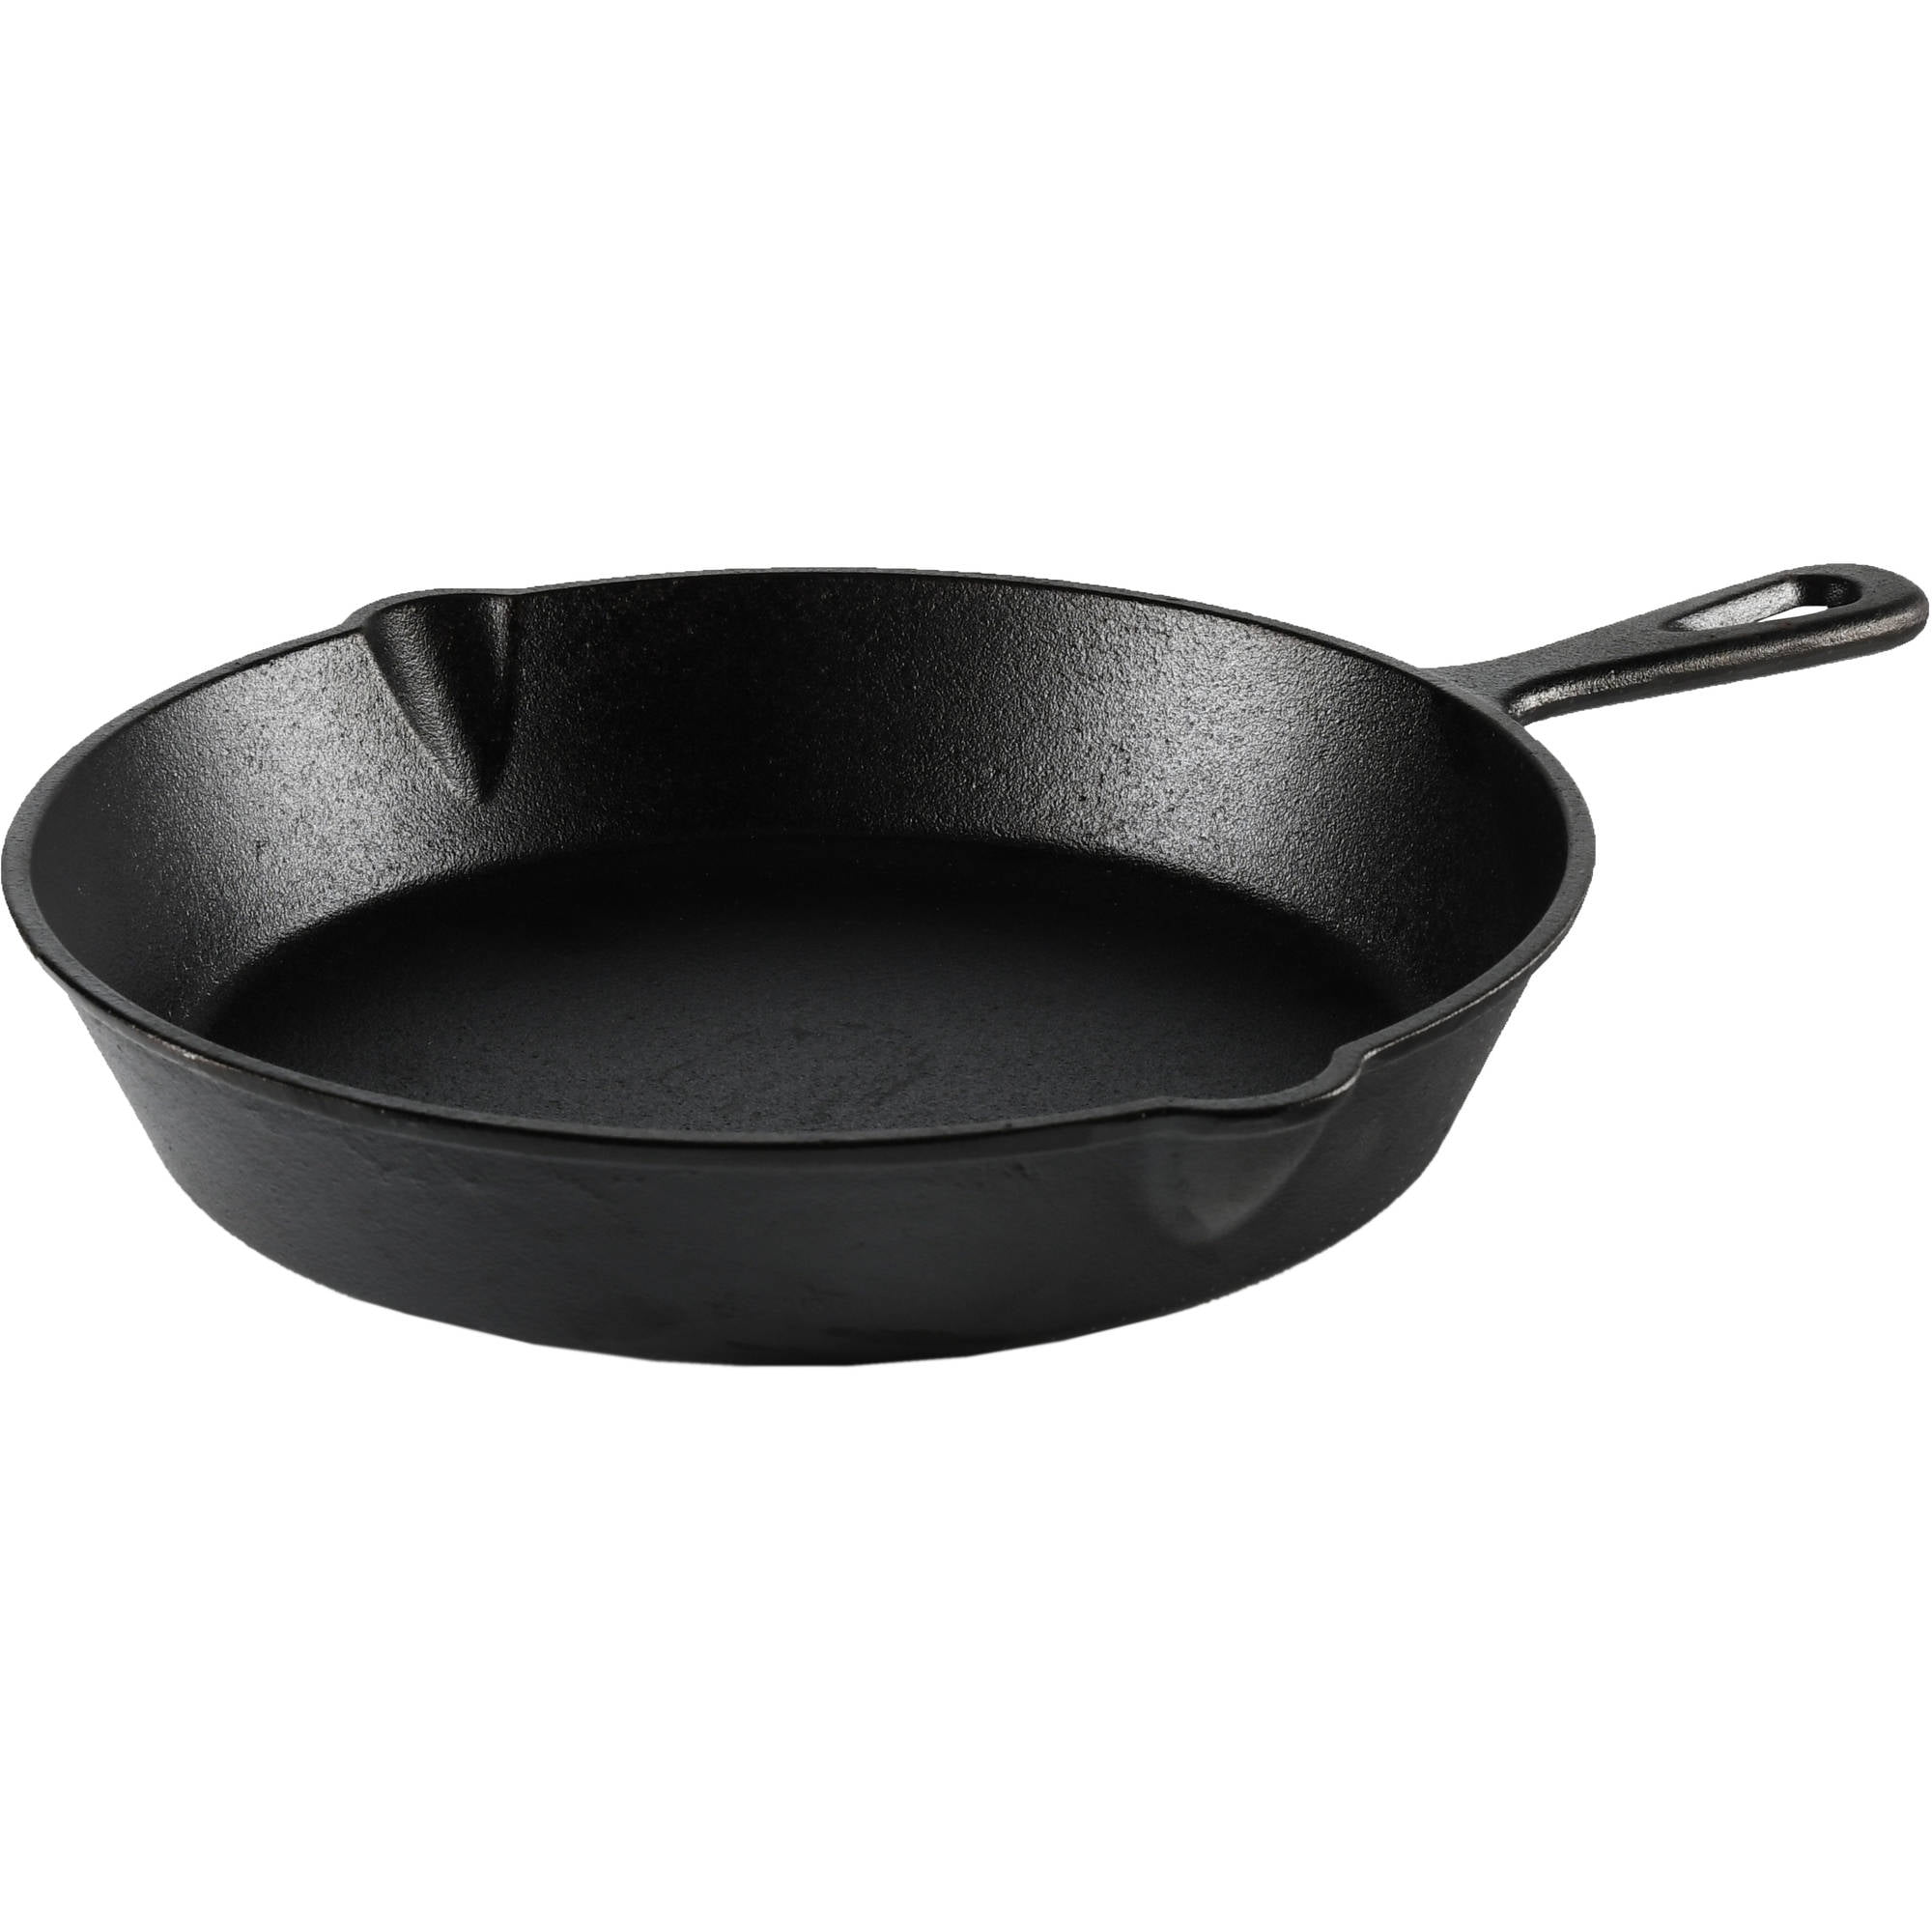 I'm taking great care of this Lodge cast iron skillet. After use I scrape  it out with some hot water while the pan is hot and then wipe it down with a